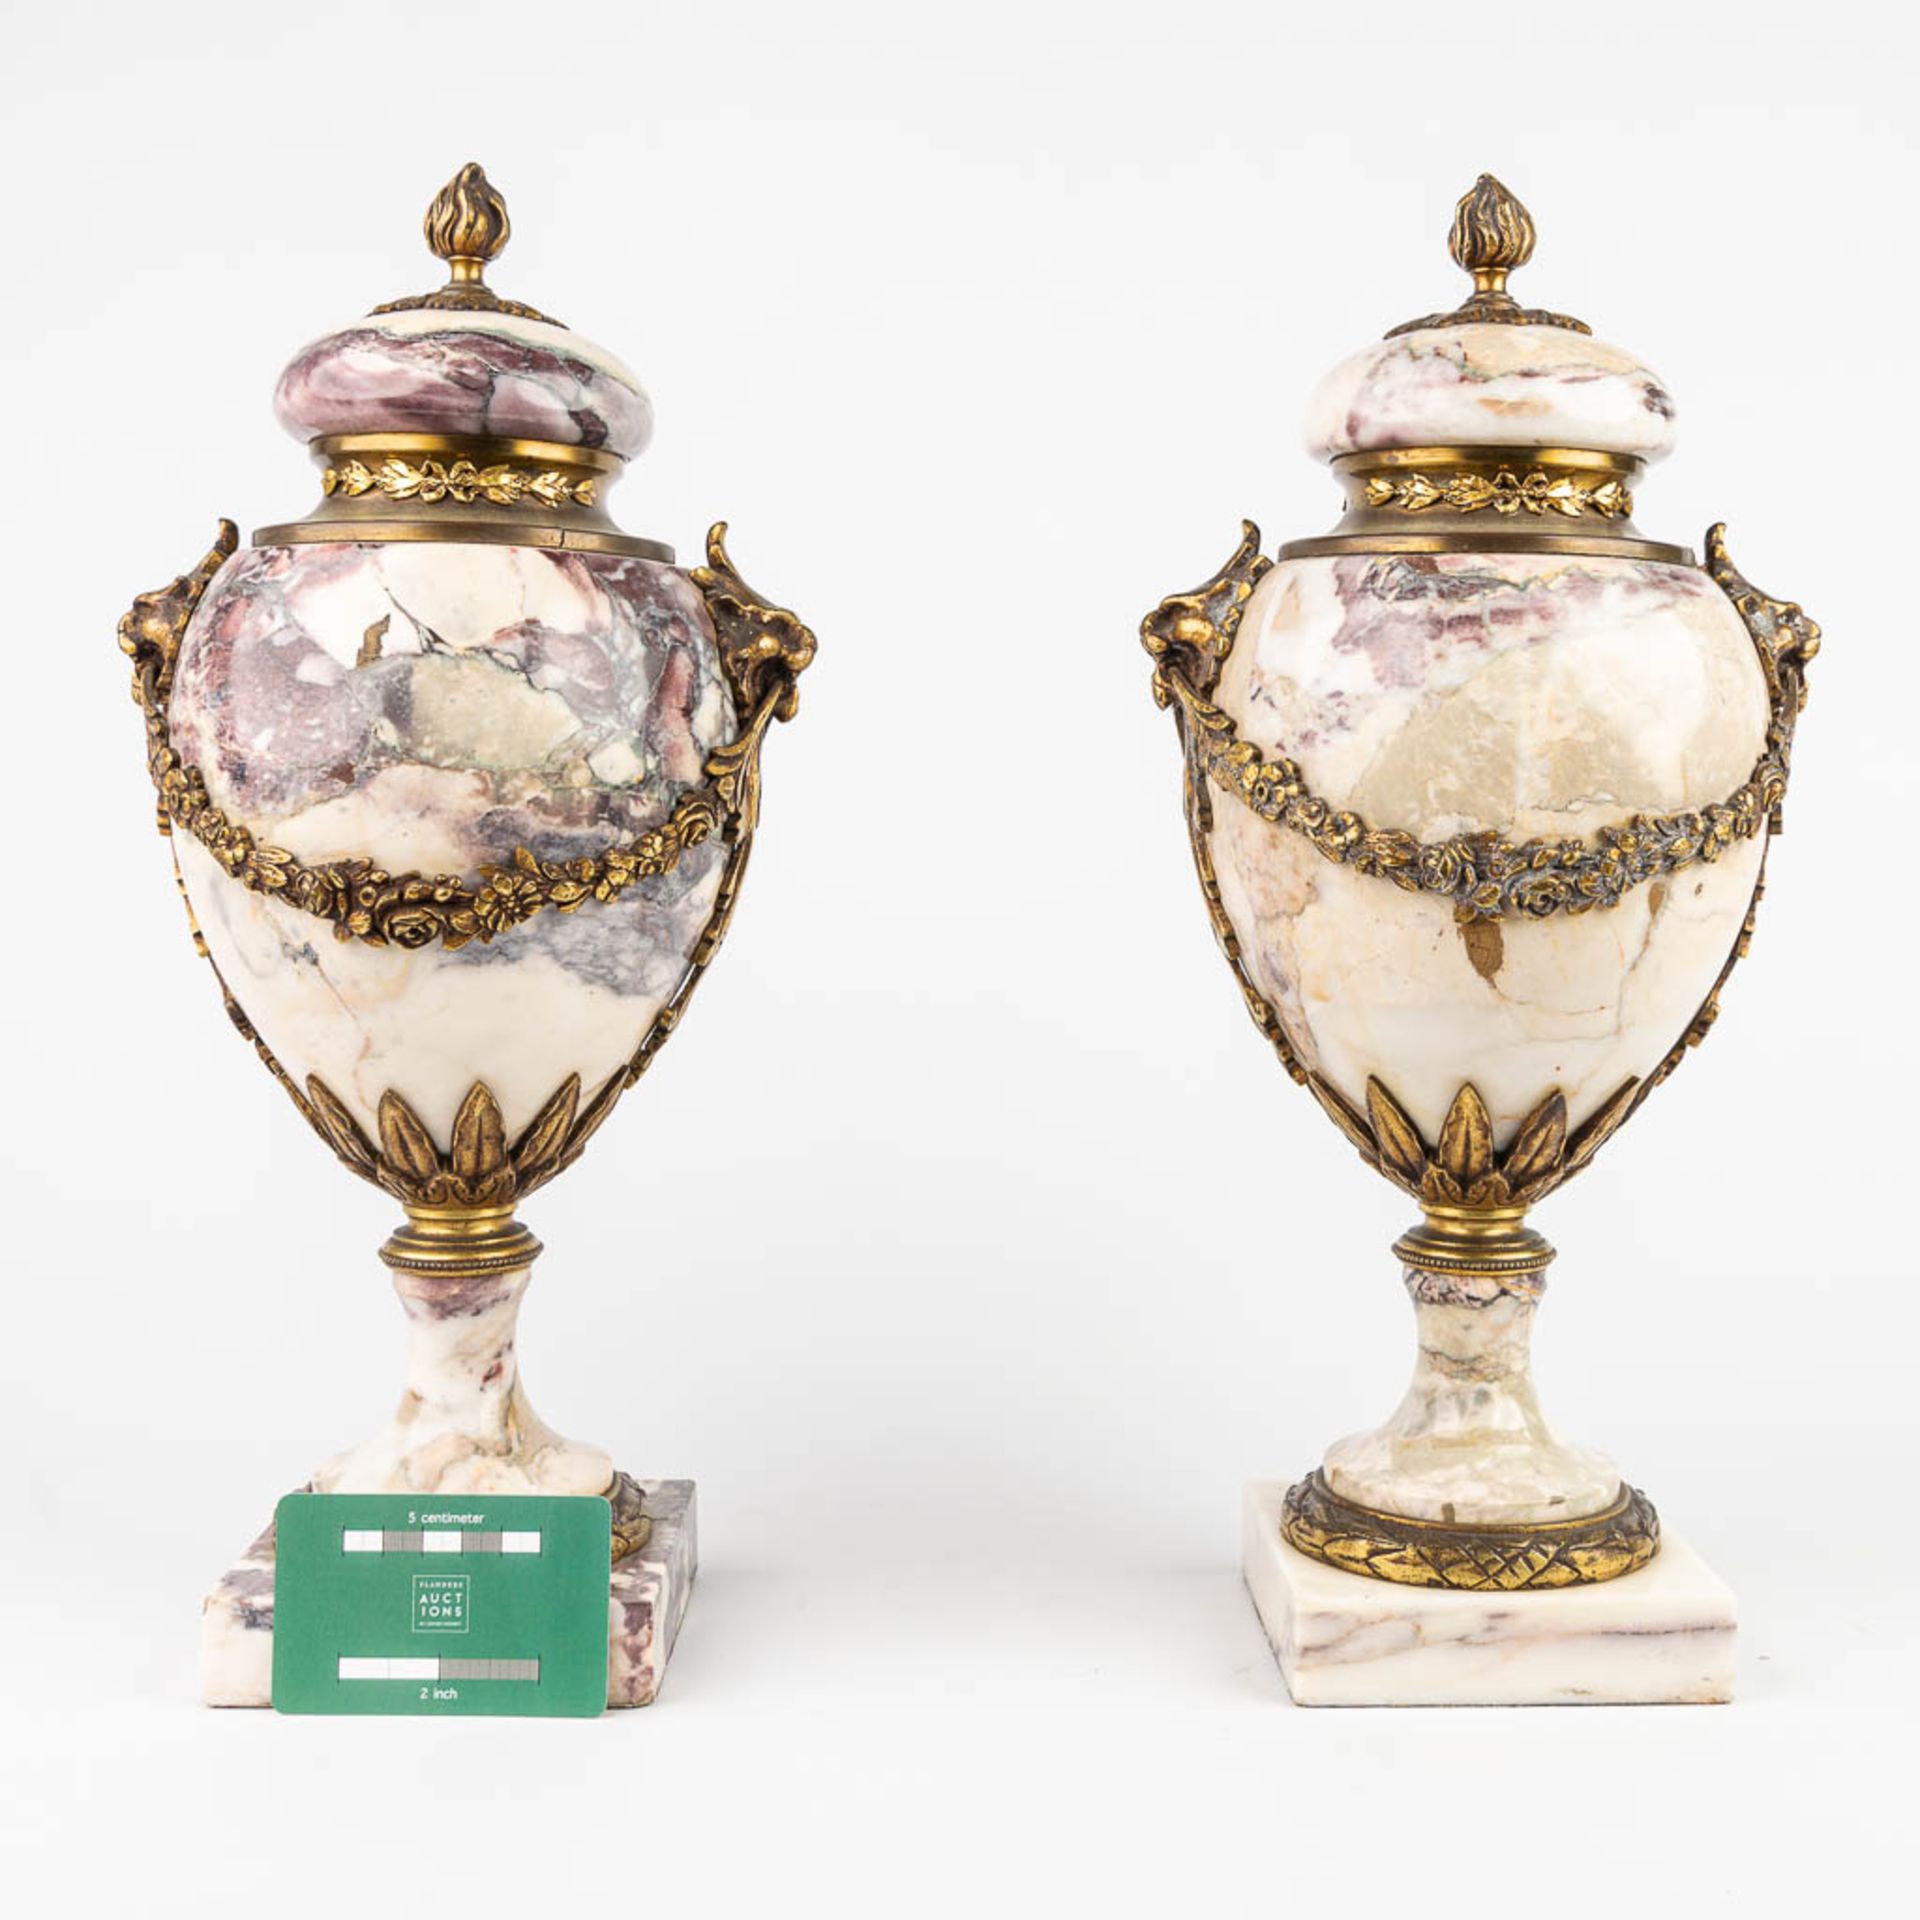 A pair of cassolettes made of marble and mounted with bronze. (H:40cm) - Image 7 of 15